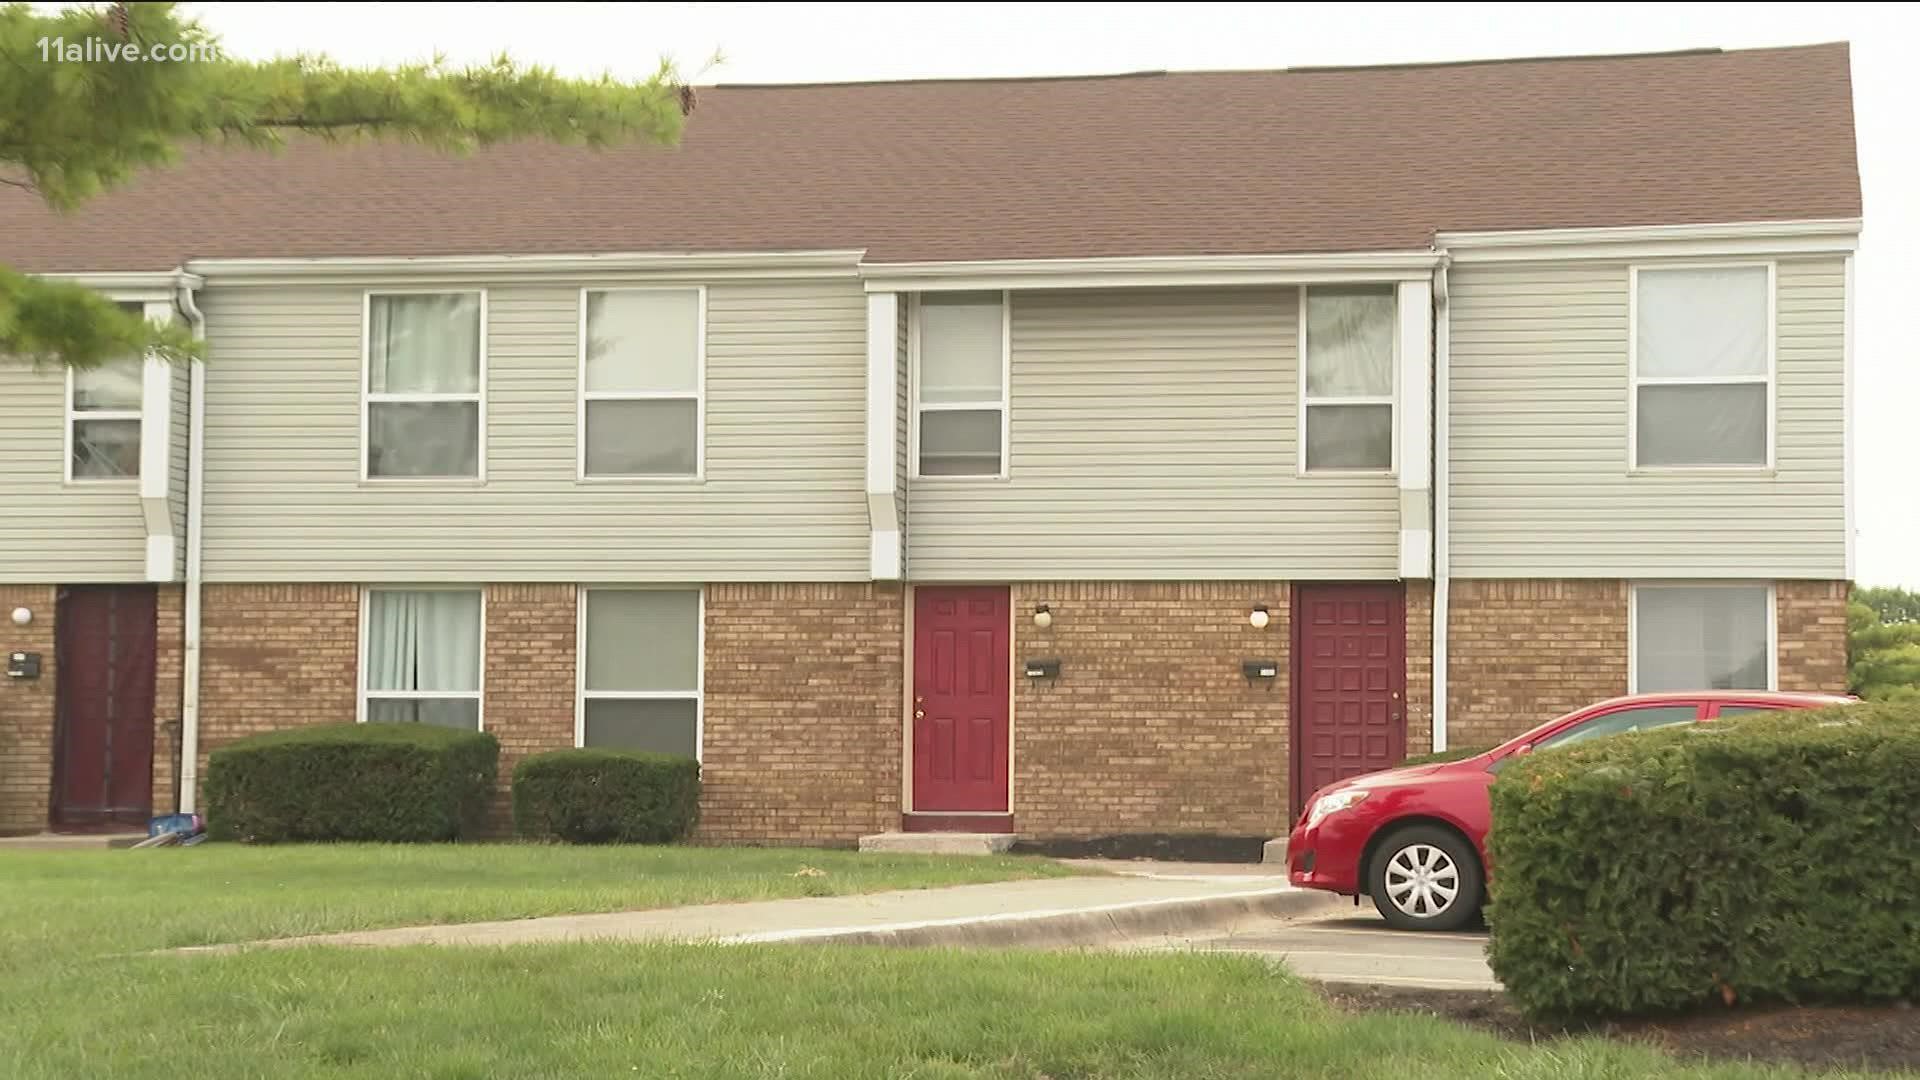 Support Anyone Facing Eviction program launched in Fulton County